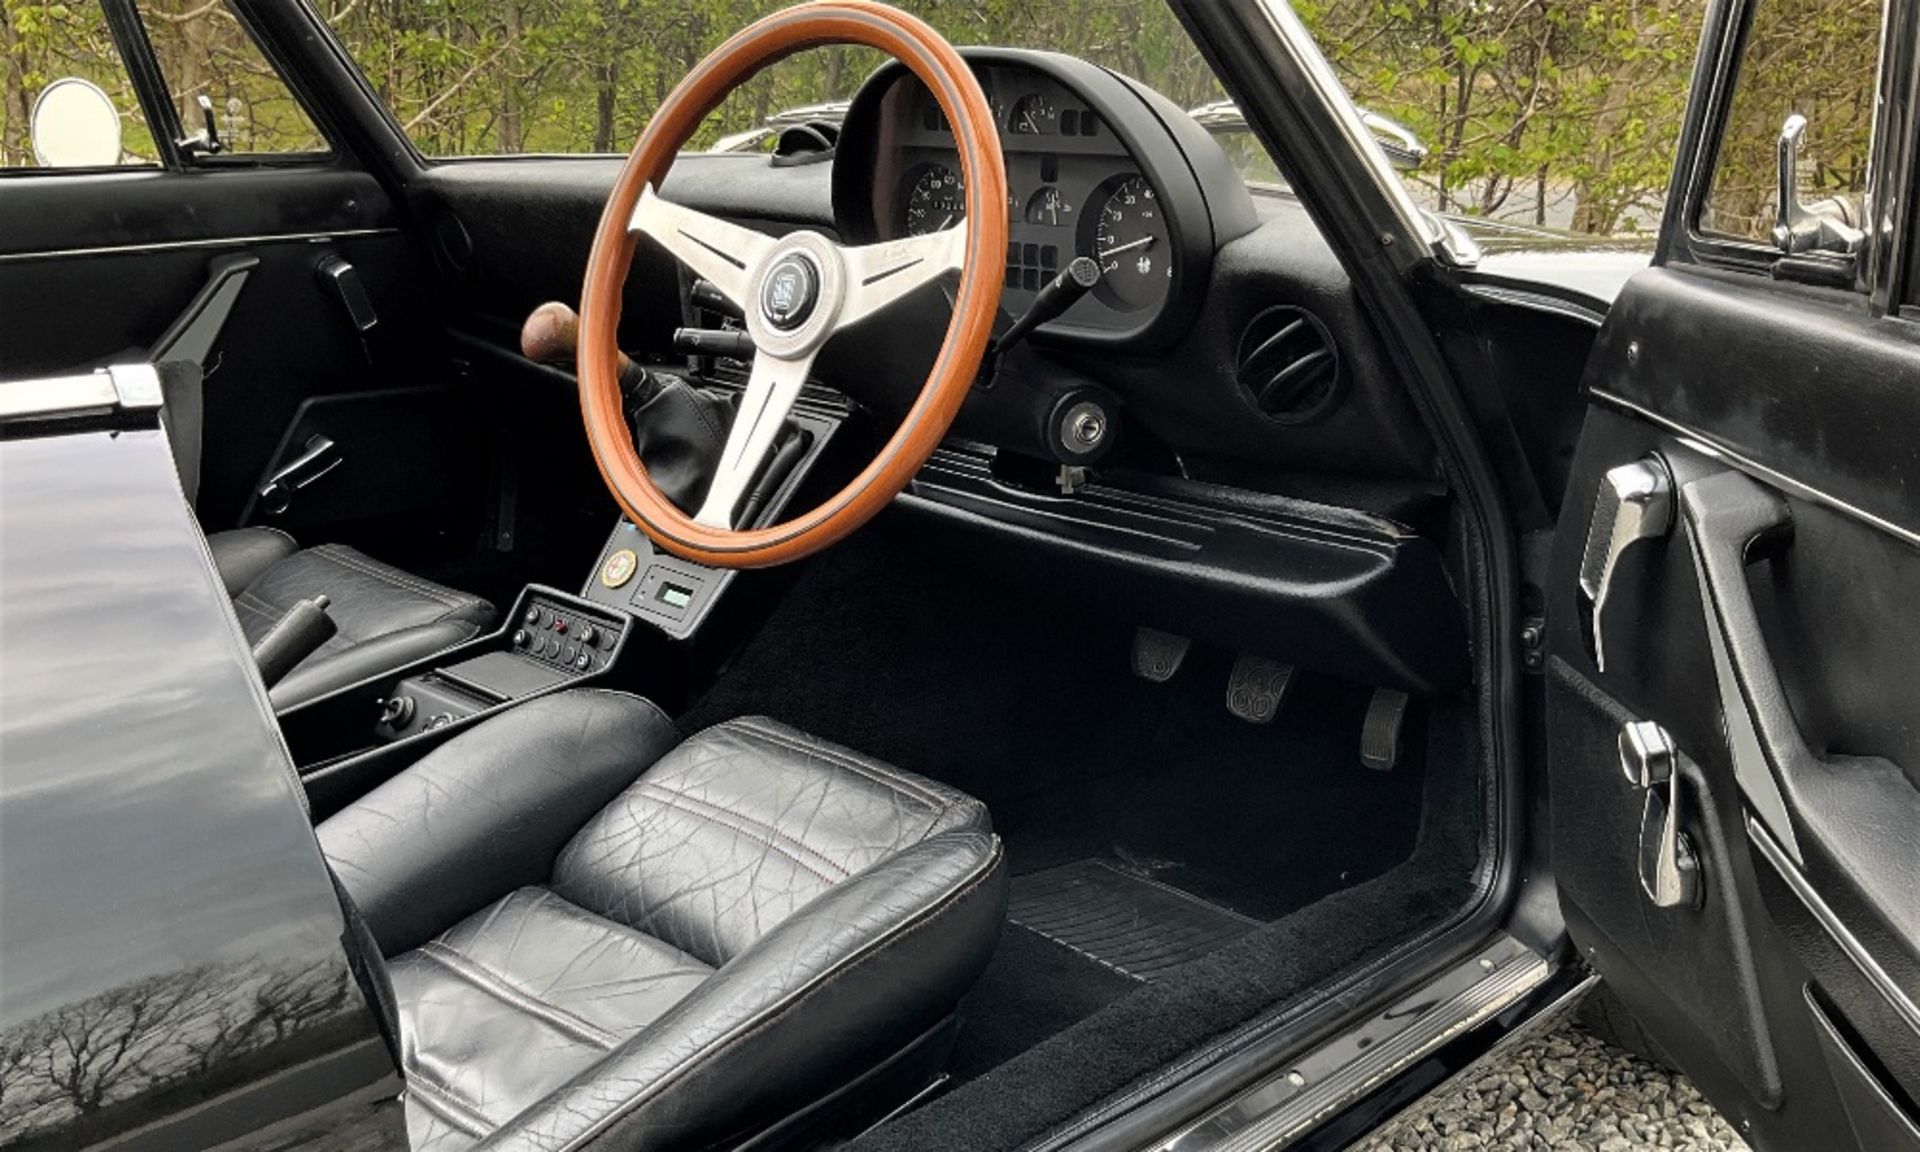 1989 ALFA-ROMEO SPIDER 2.0 VELOCE                 Registration Number: G258 MAT Chassis Number: - Image 7 of 8